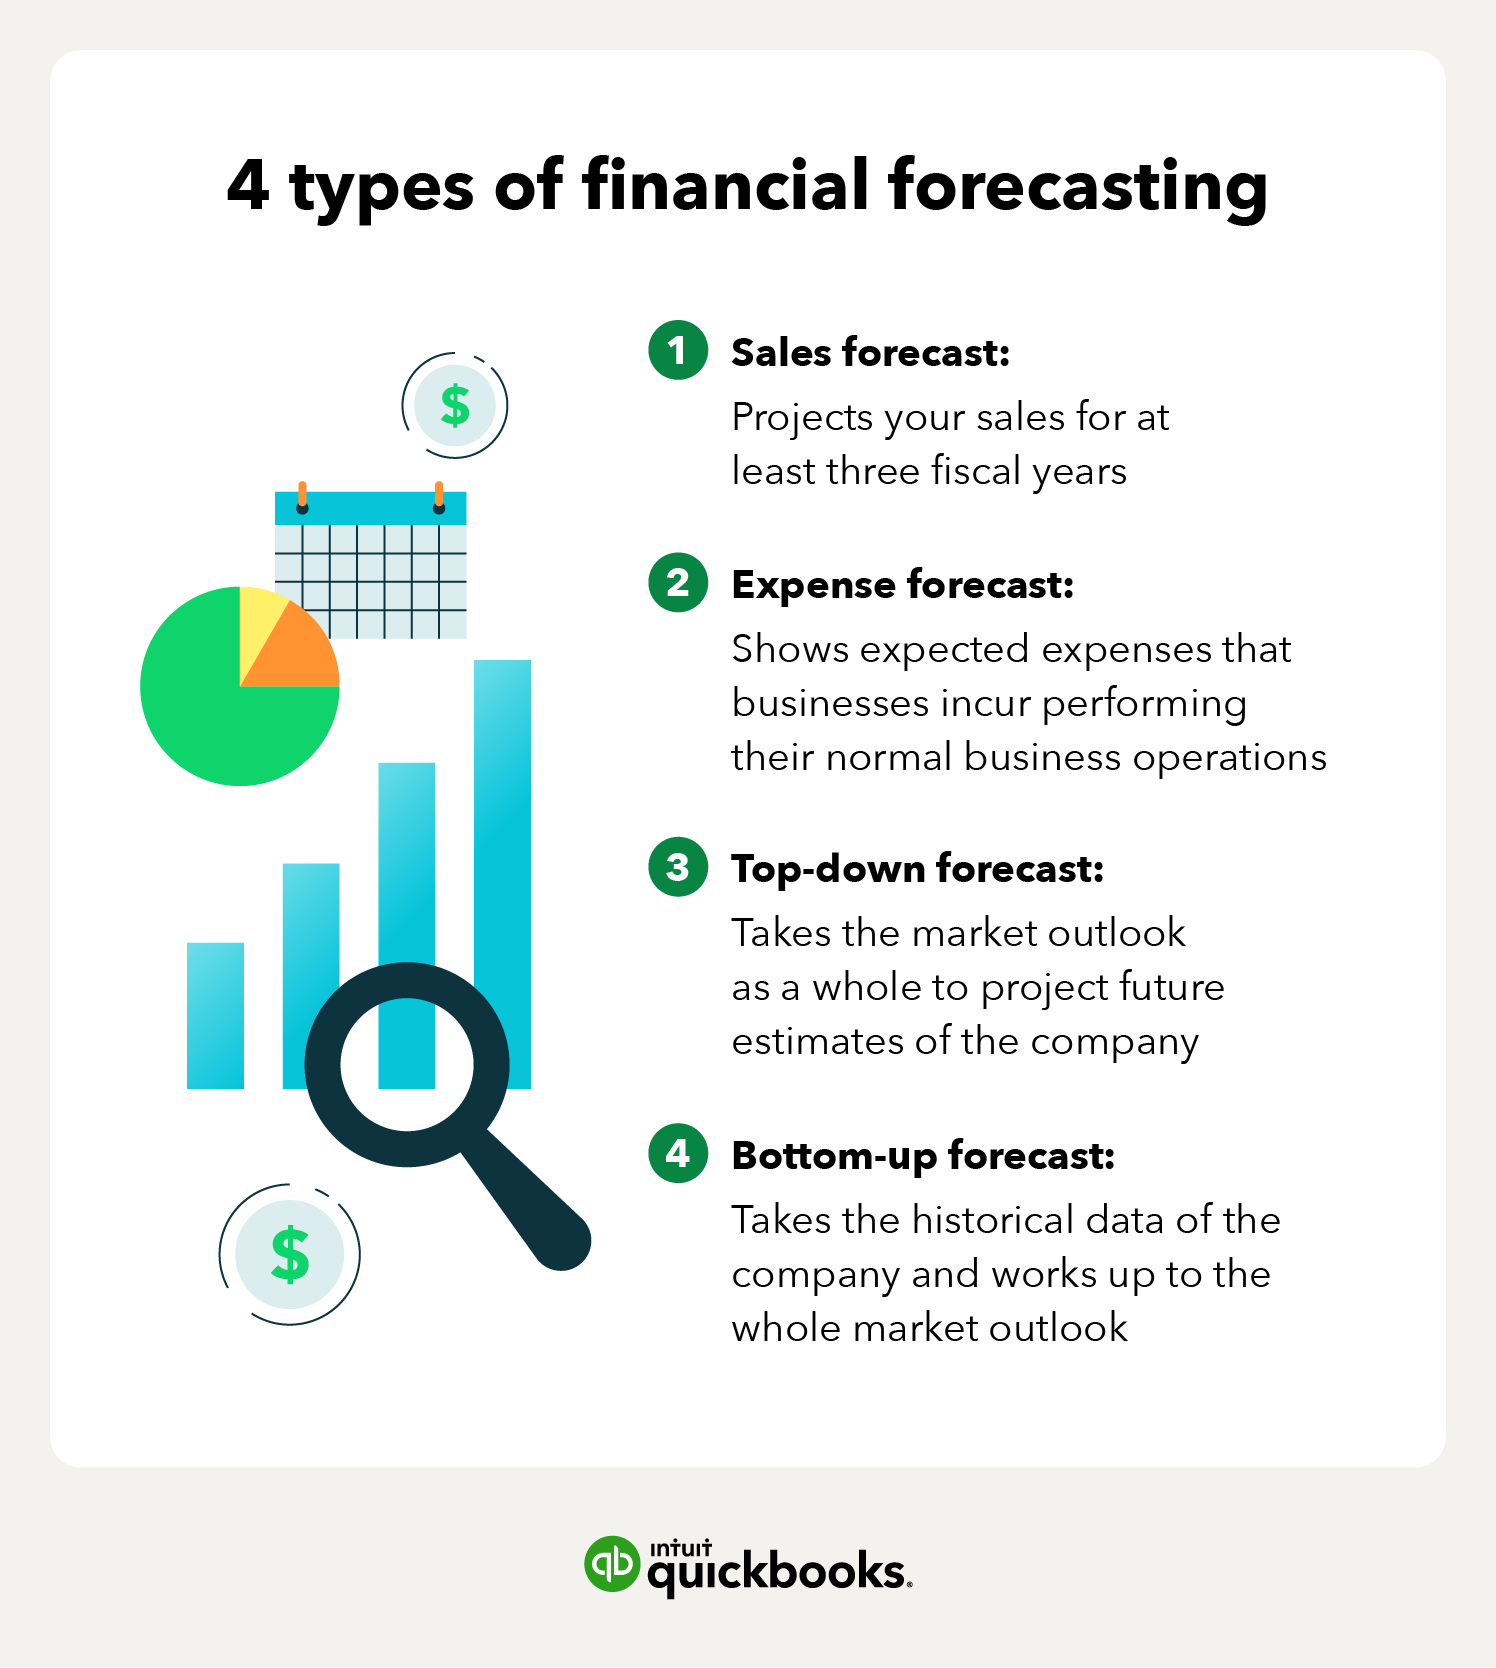 4 types of financial forecasting